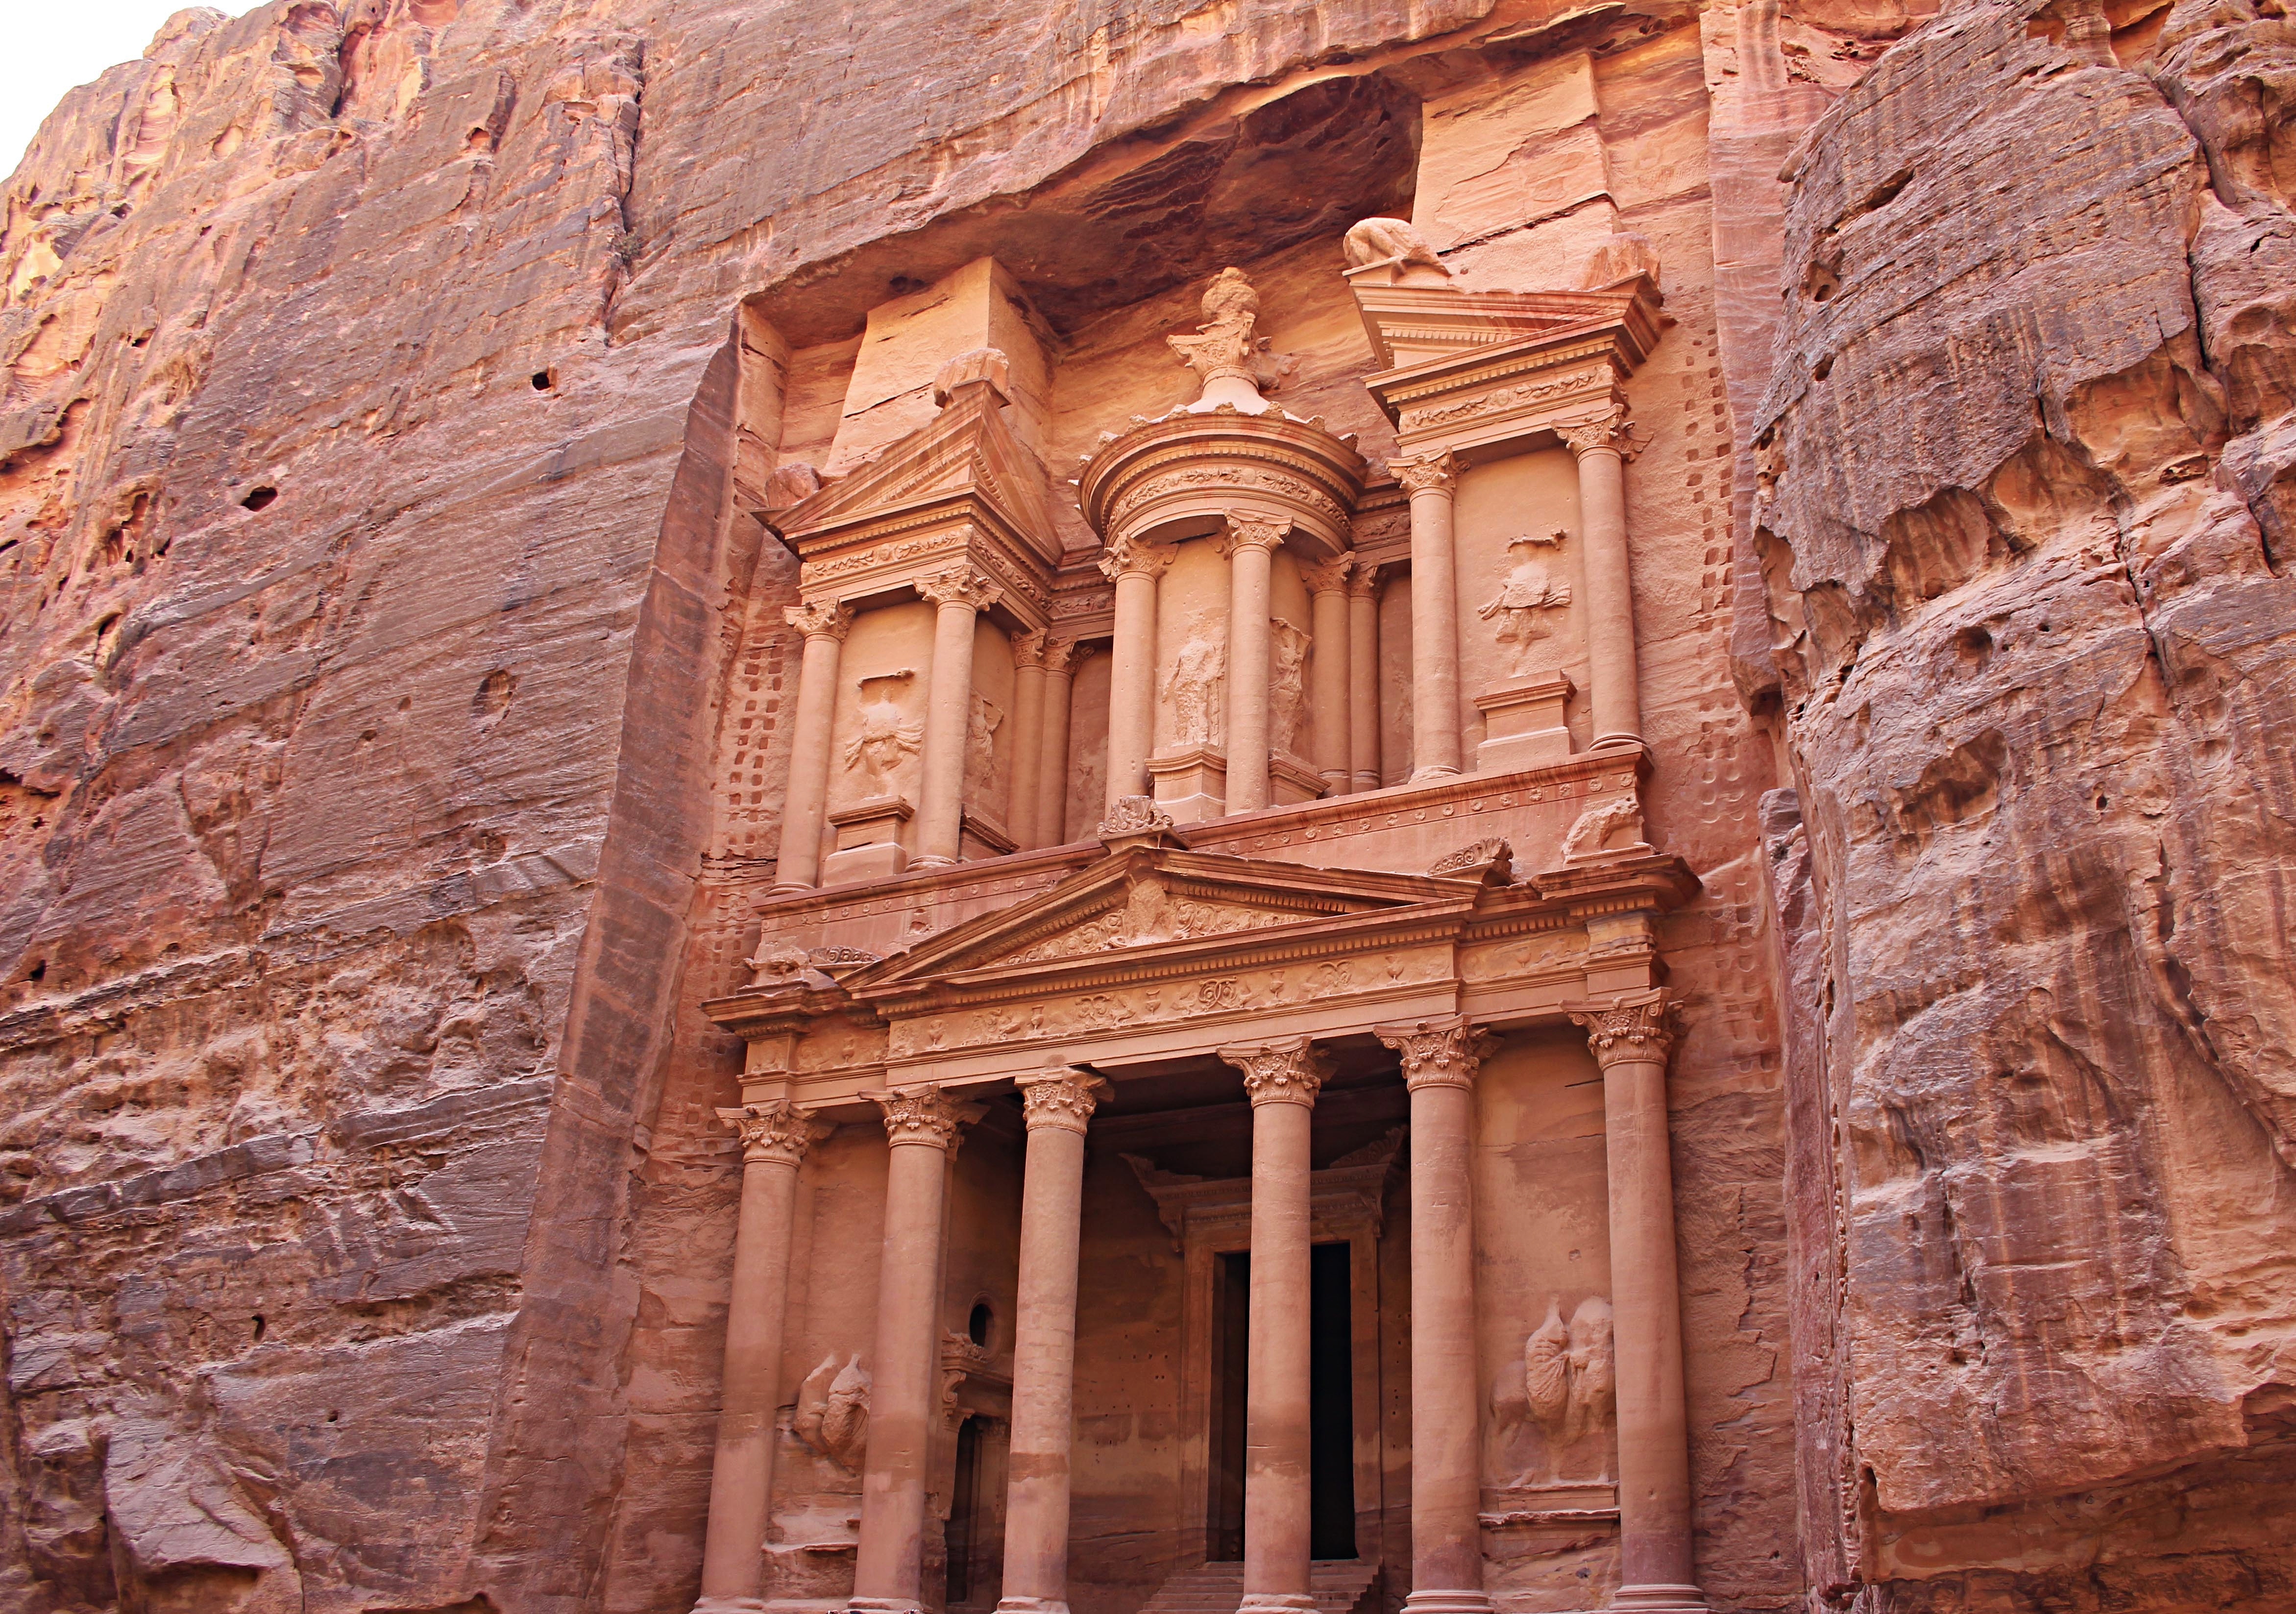 Petra - Seven Wonders of the World